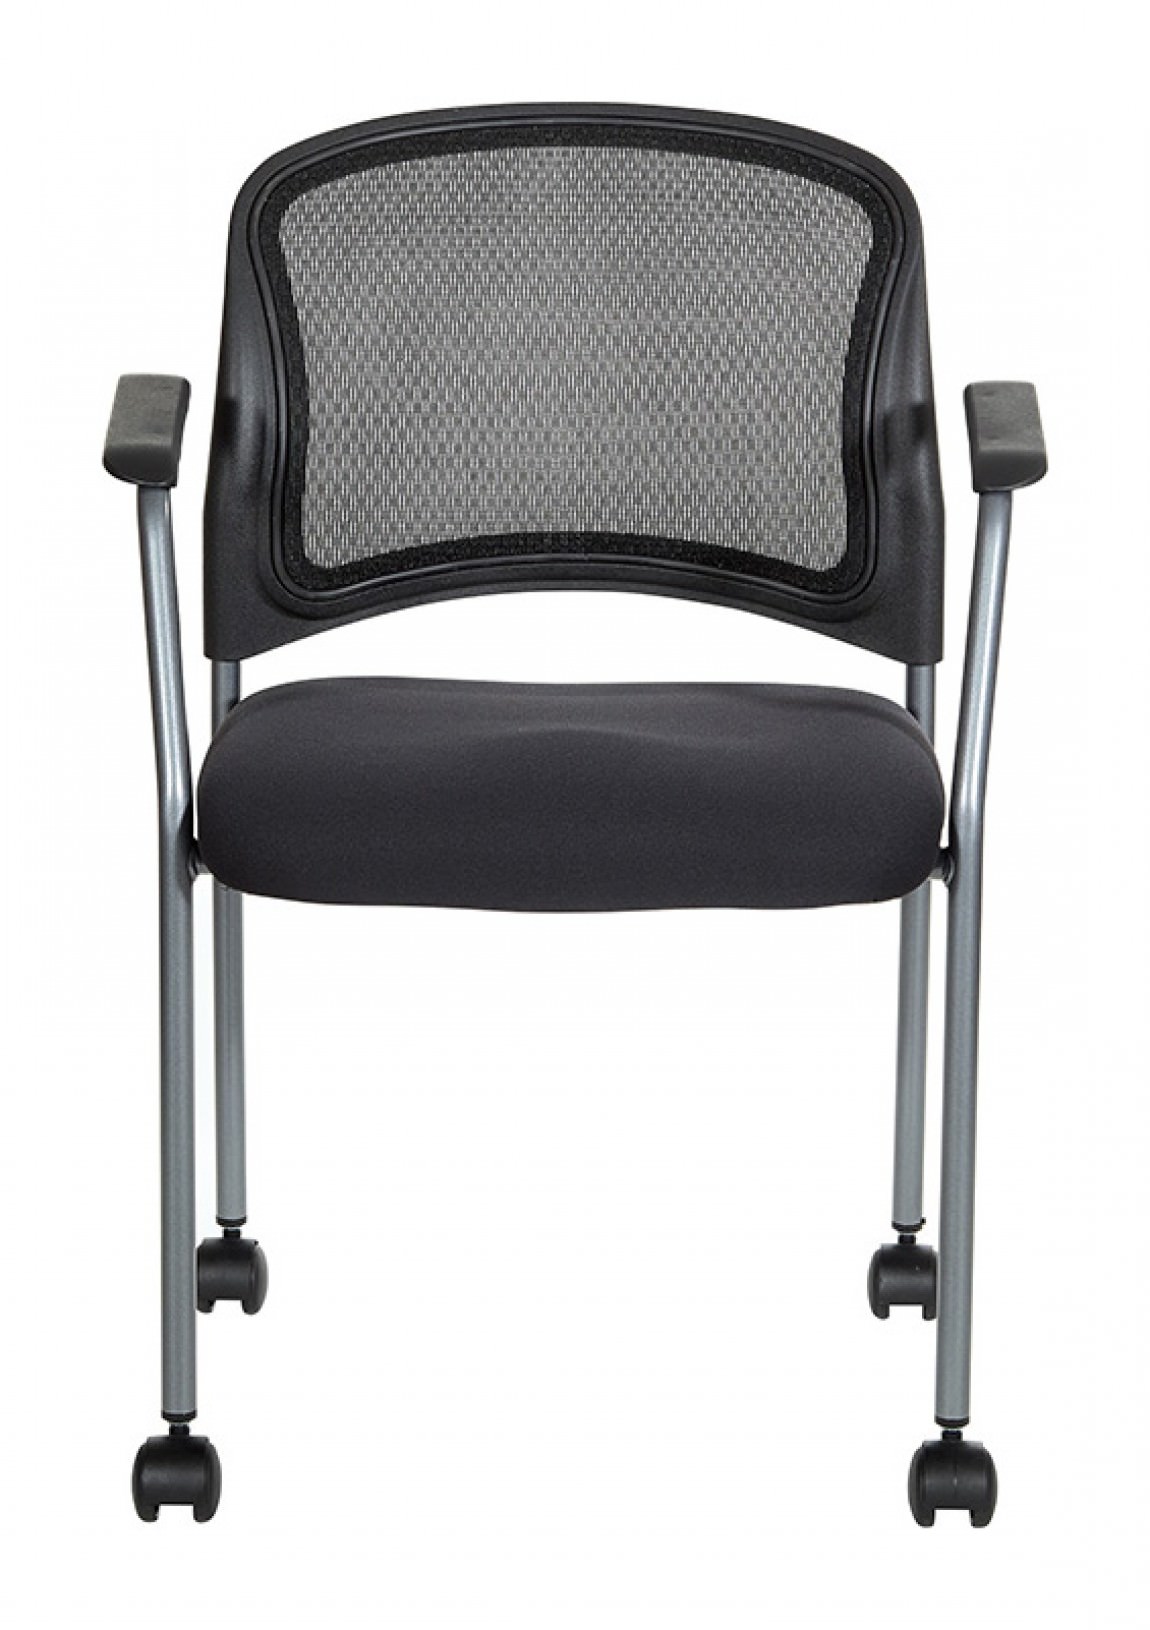 Rolling Mesh Back Stacking Chair